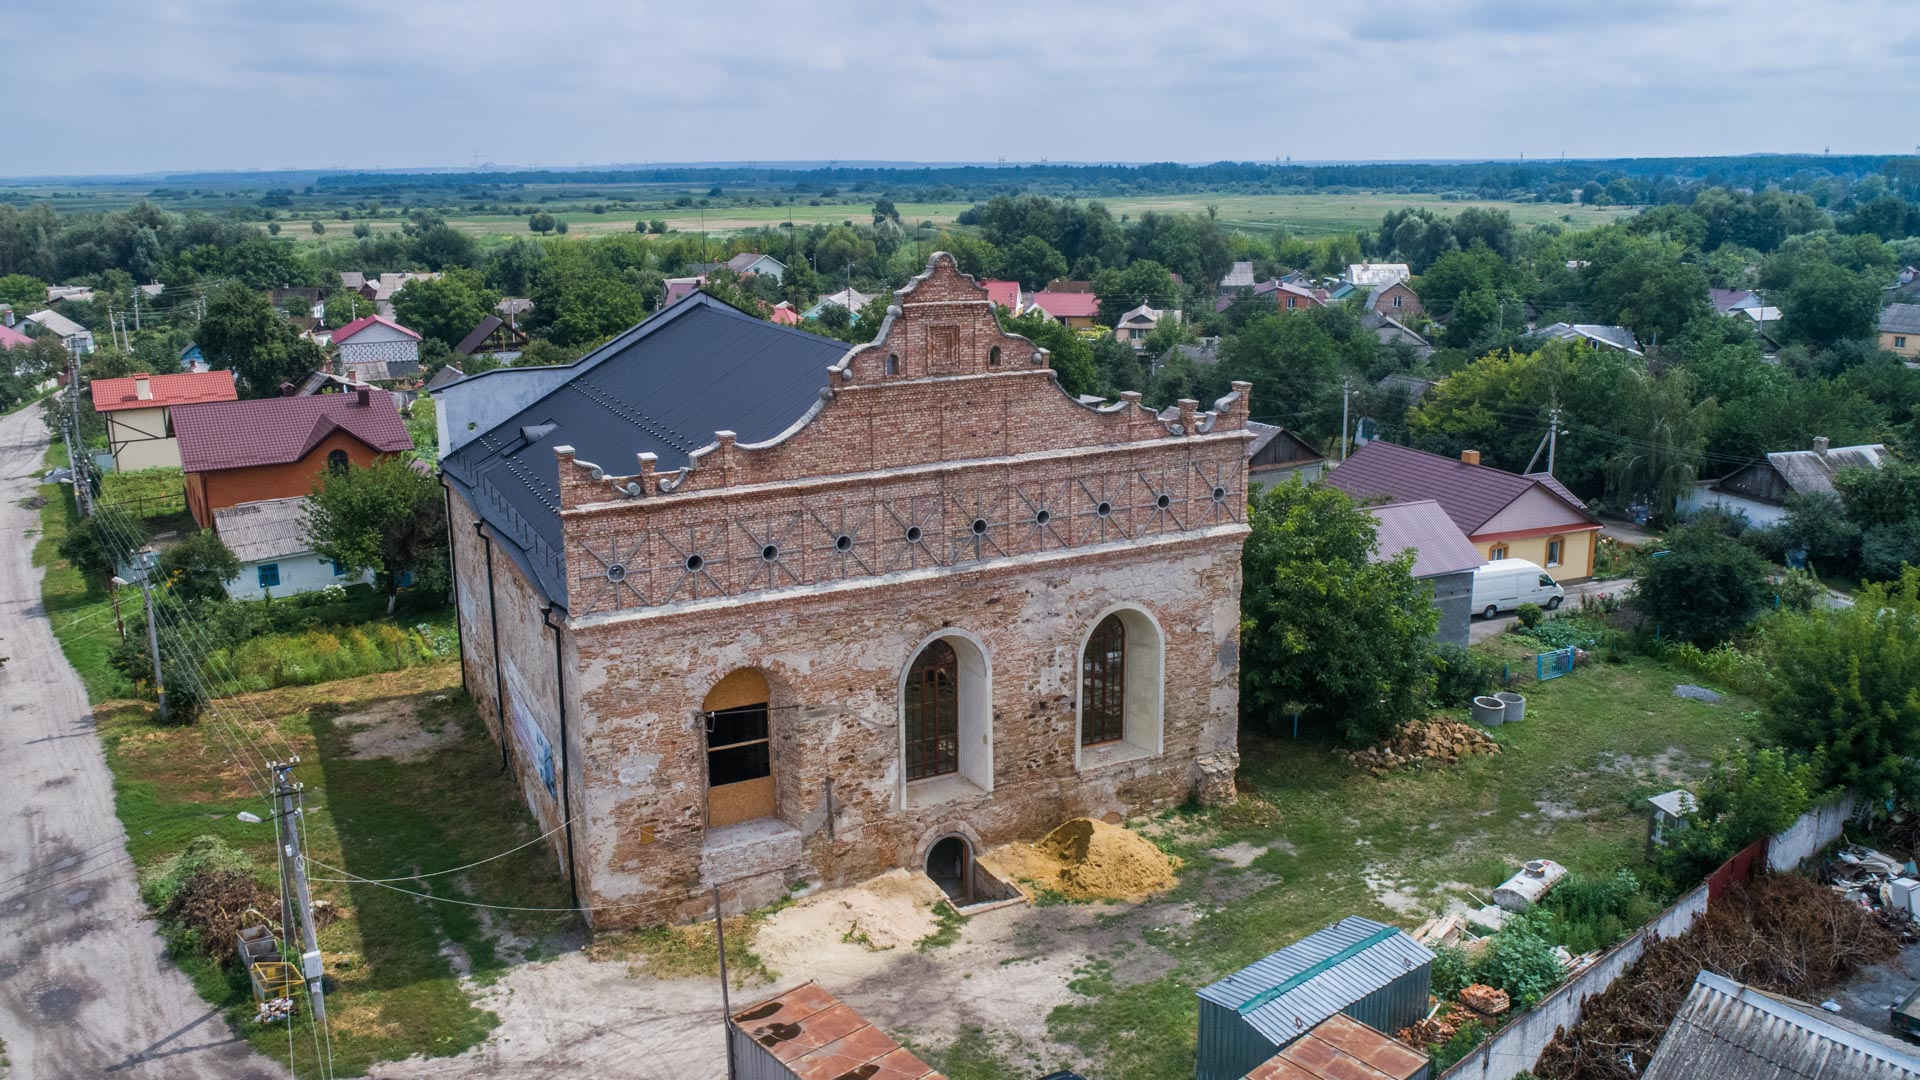 The Synagogue in Ostroh: Reconstruction of the ruins